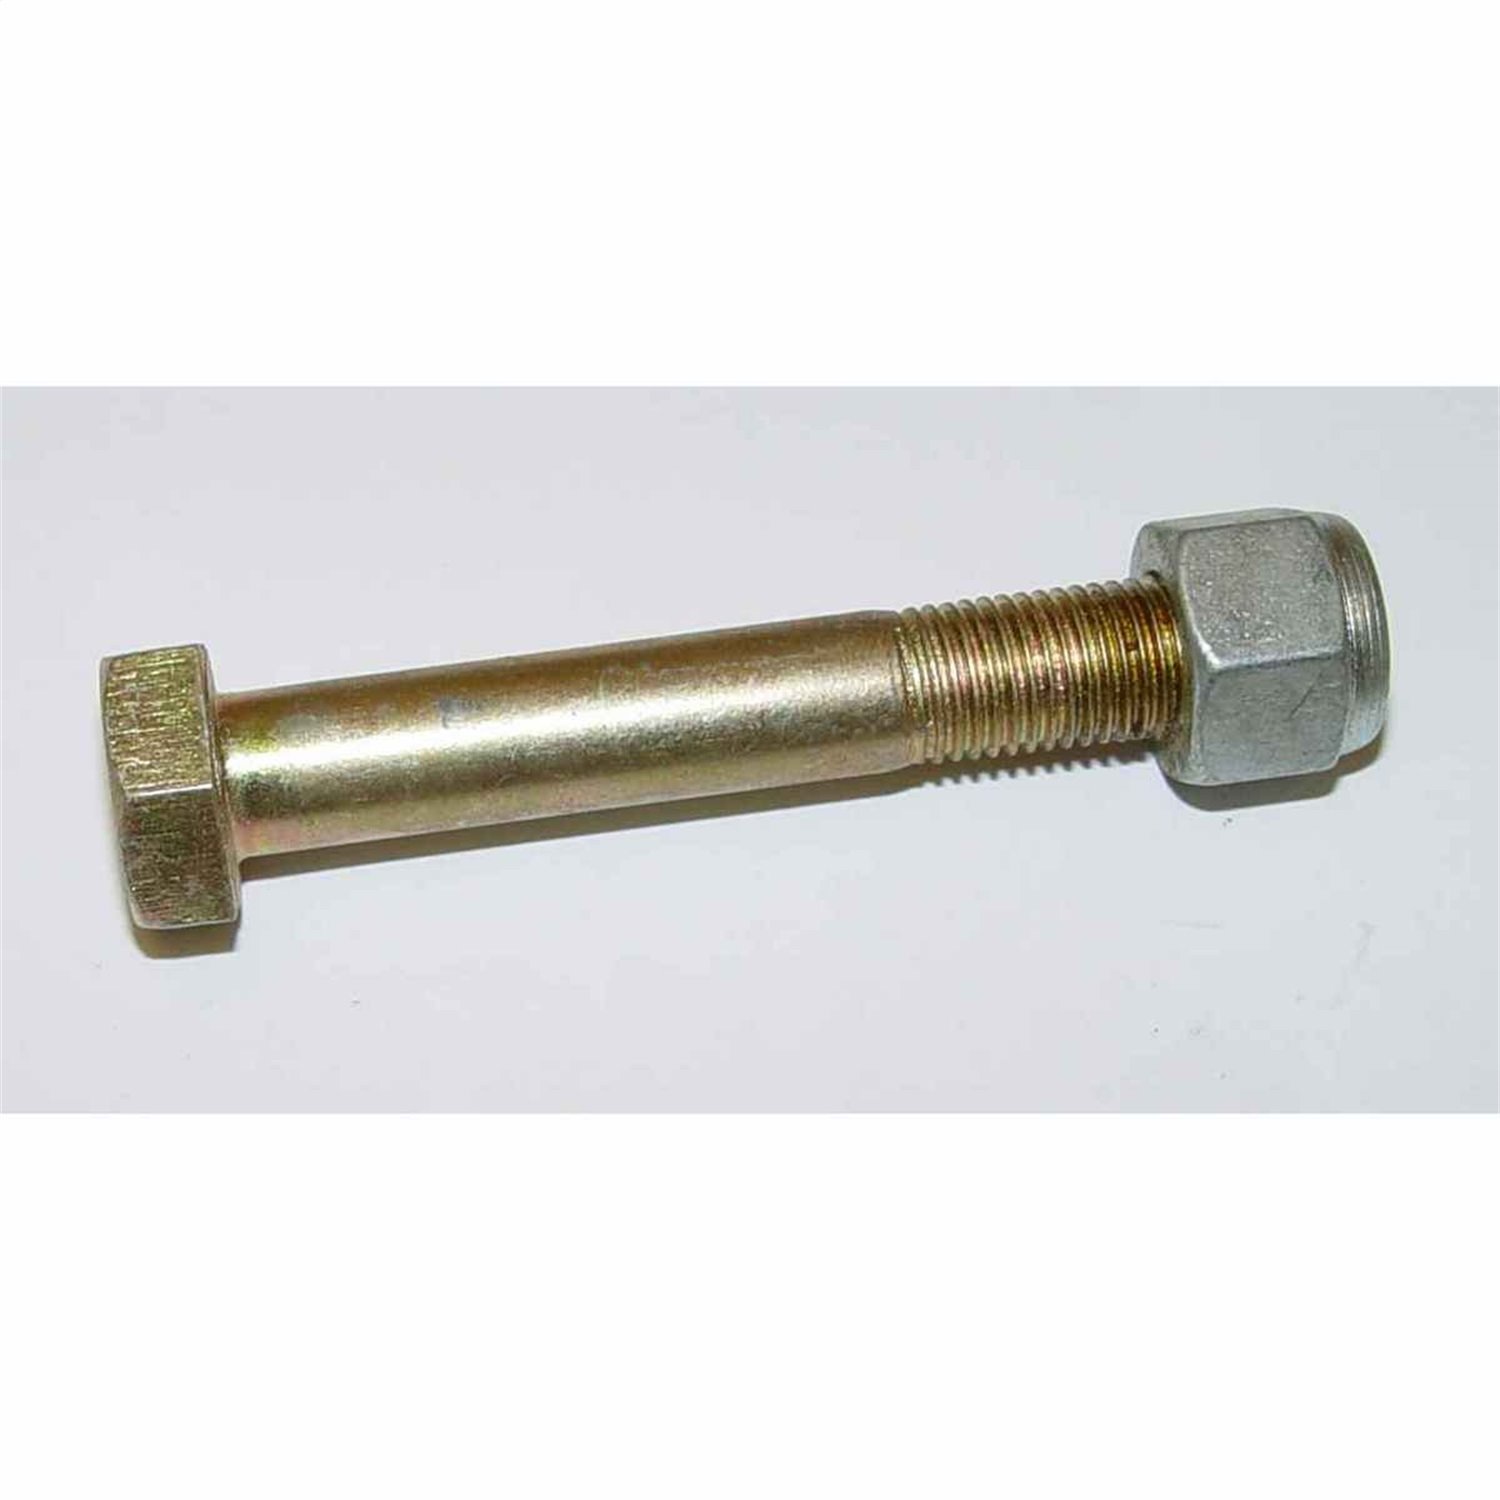 Factory-style replacement leaf spring pivot bolt from Omix-ADA, Fits 60-75 Jeep CJ5 and CJ6